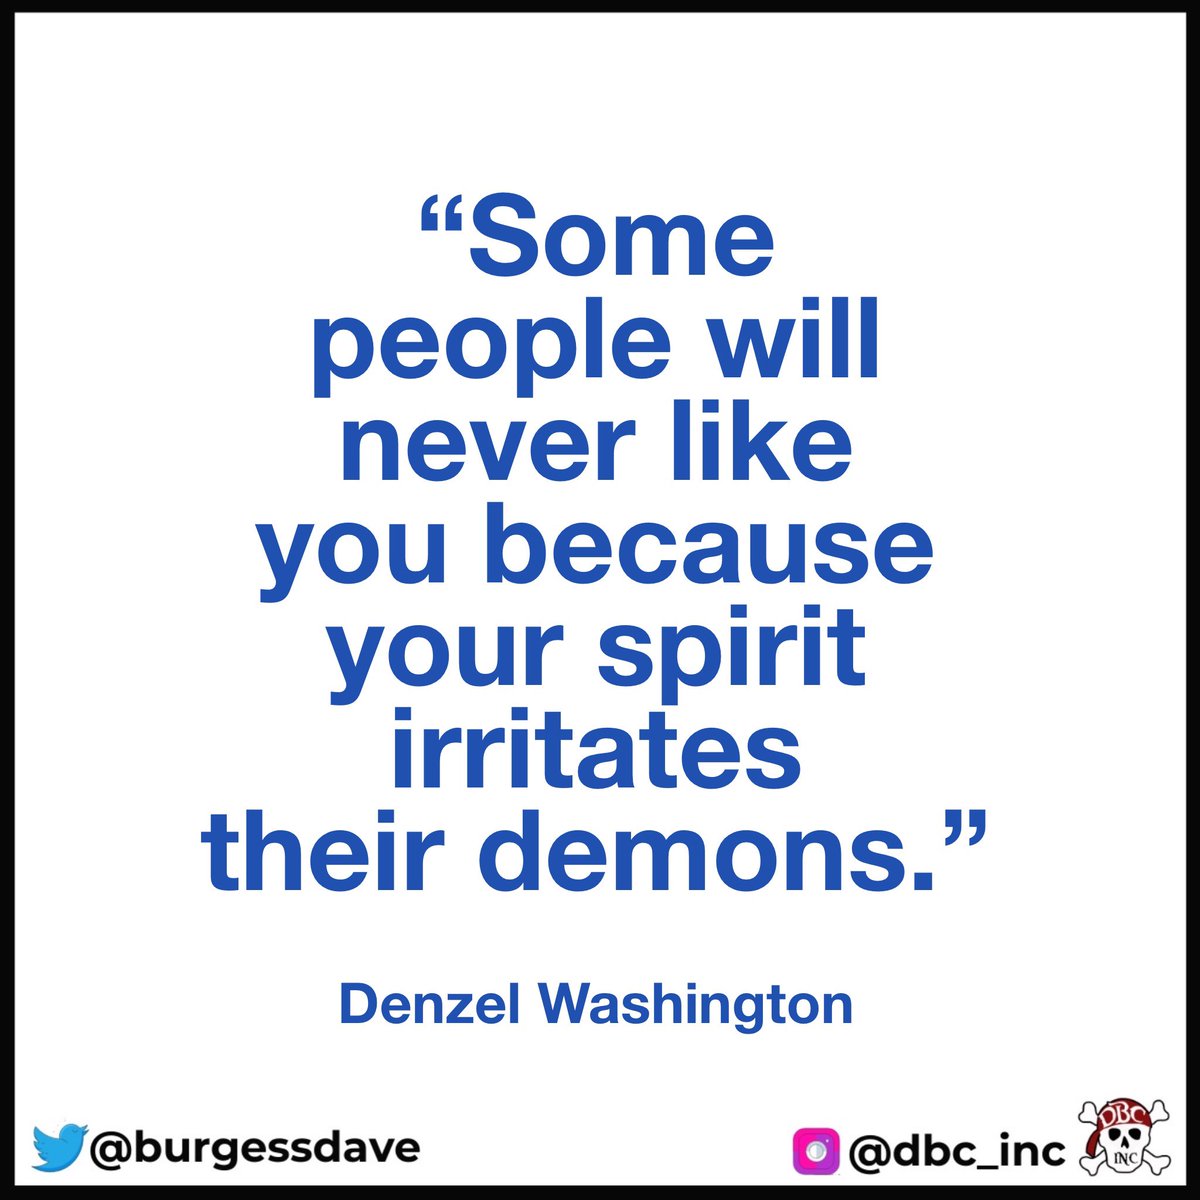 'Some people will never like you because your spirit irritates their demons.' - Denzel Washington

#tlap